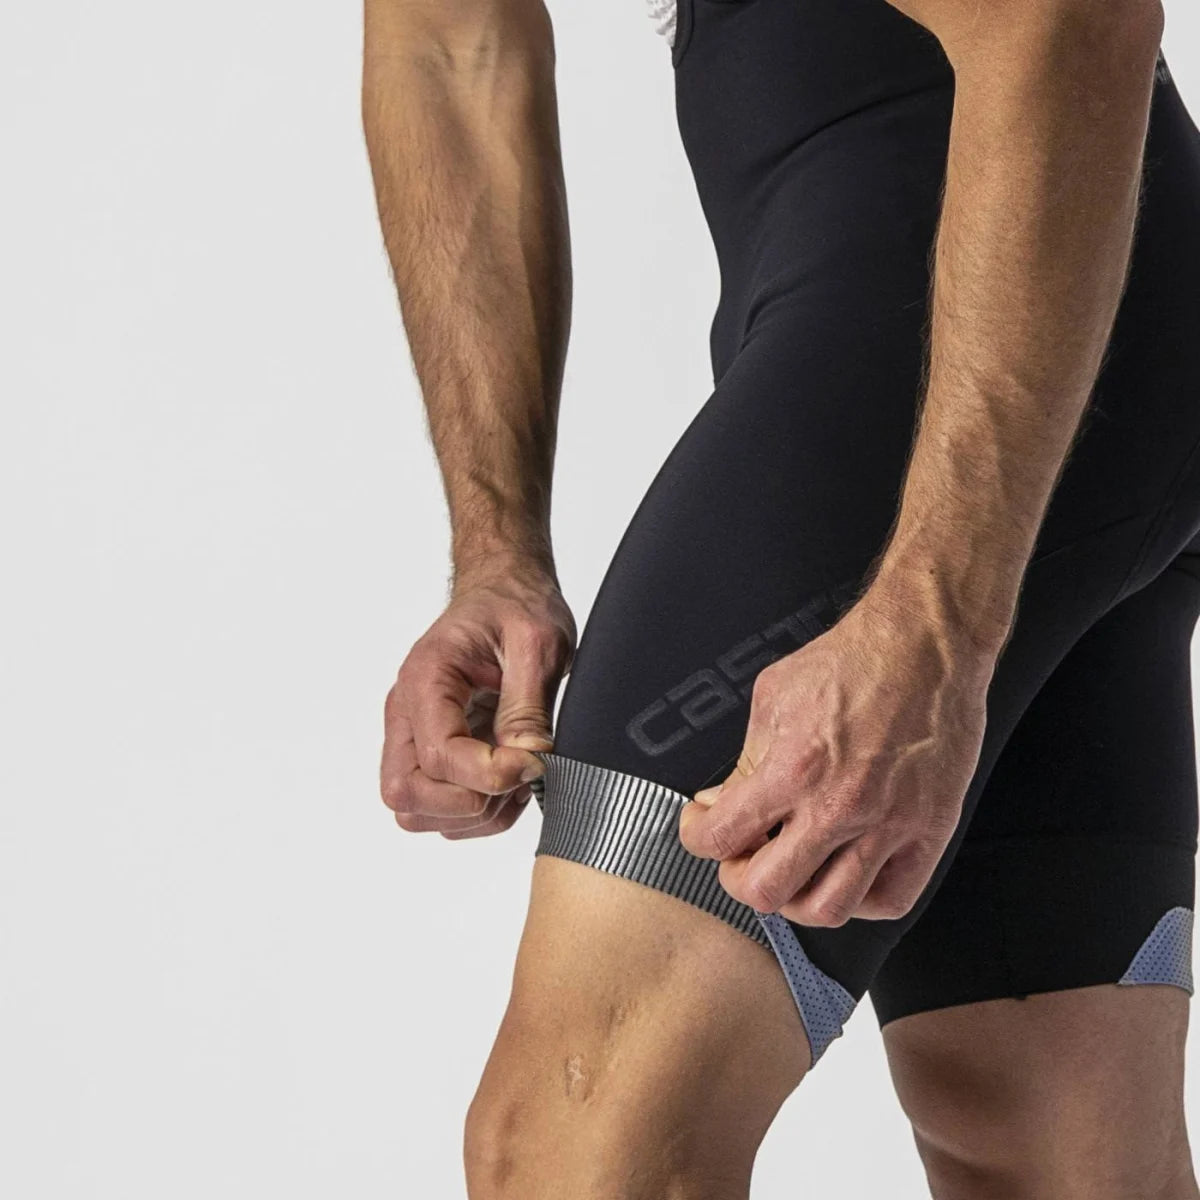 Bib shorts for all conditions